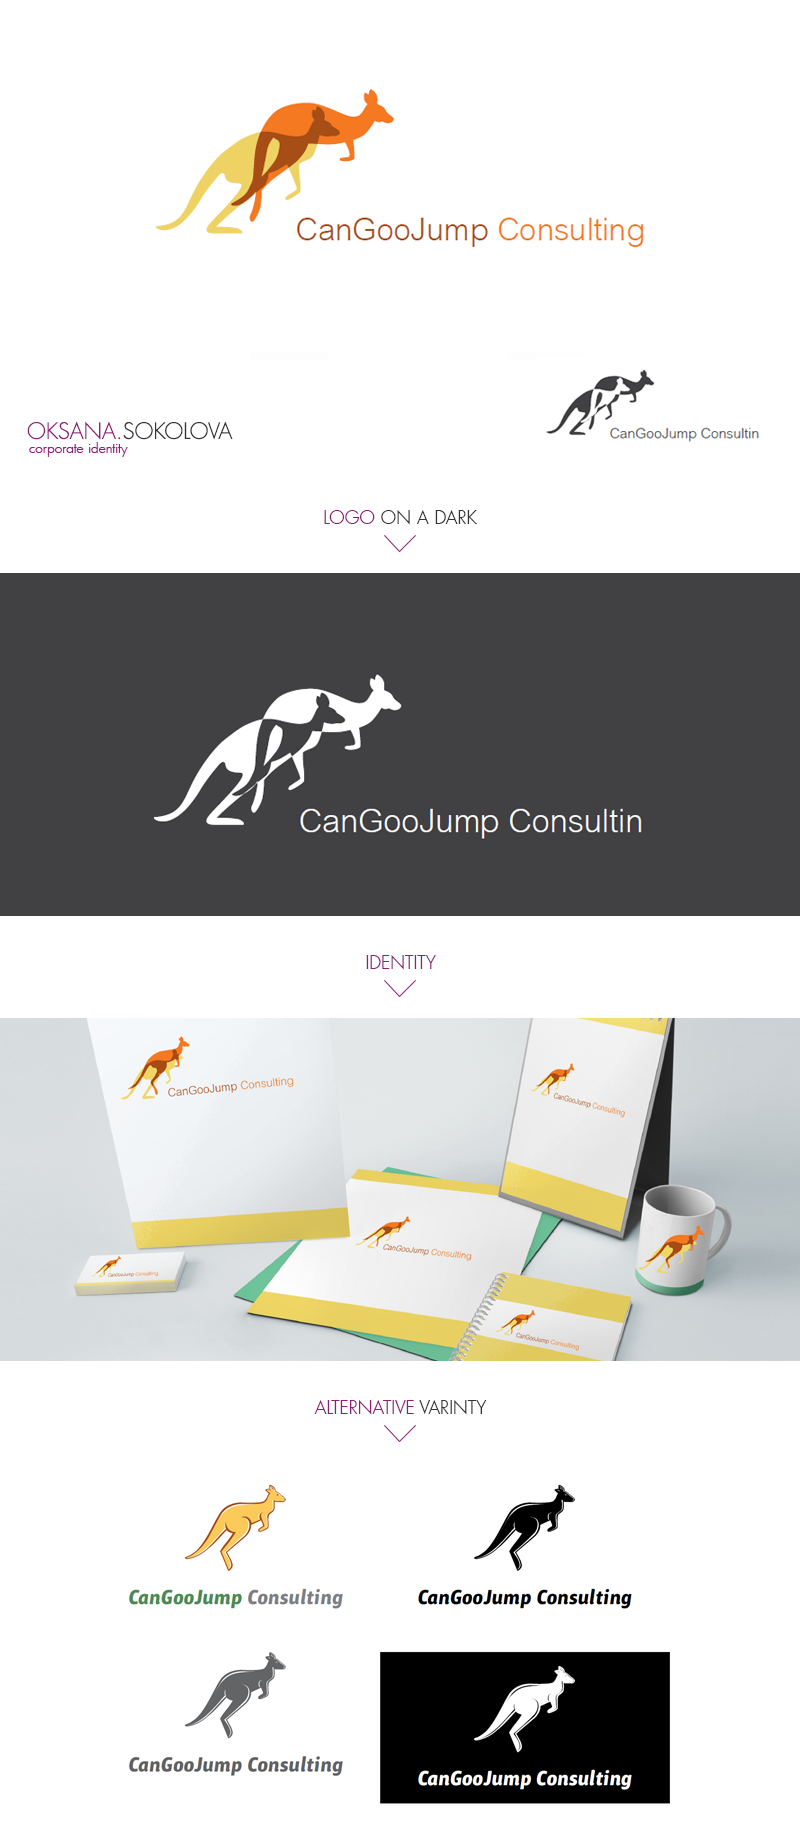 CanGooJump Consulting